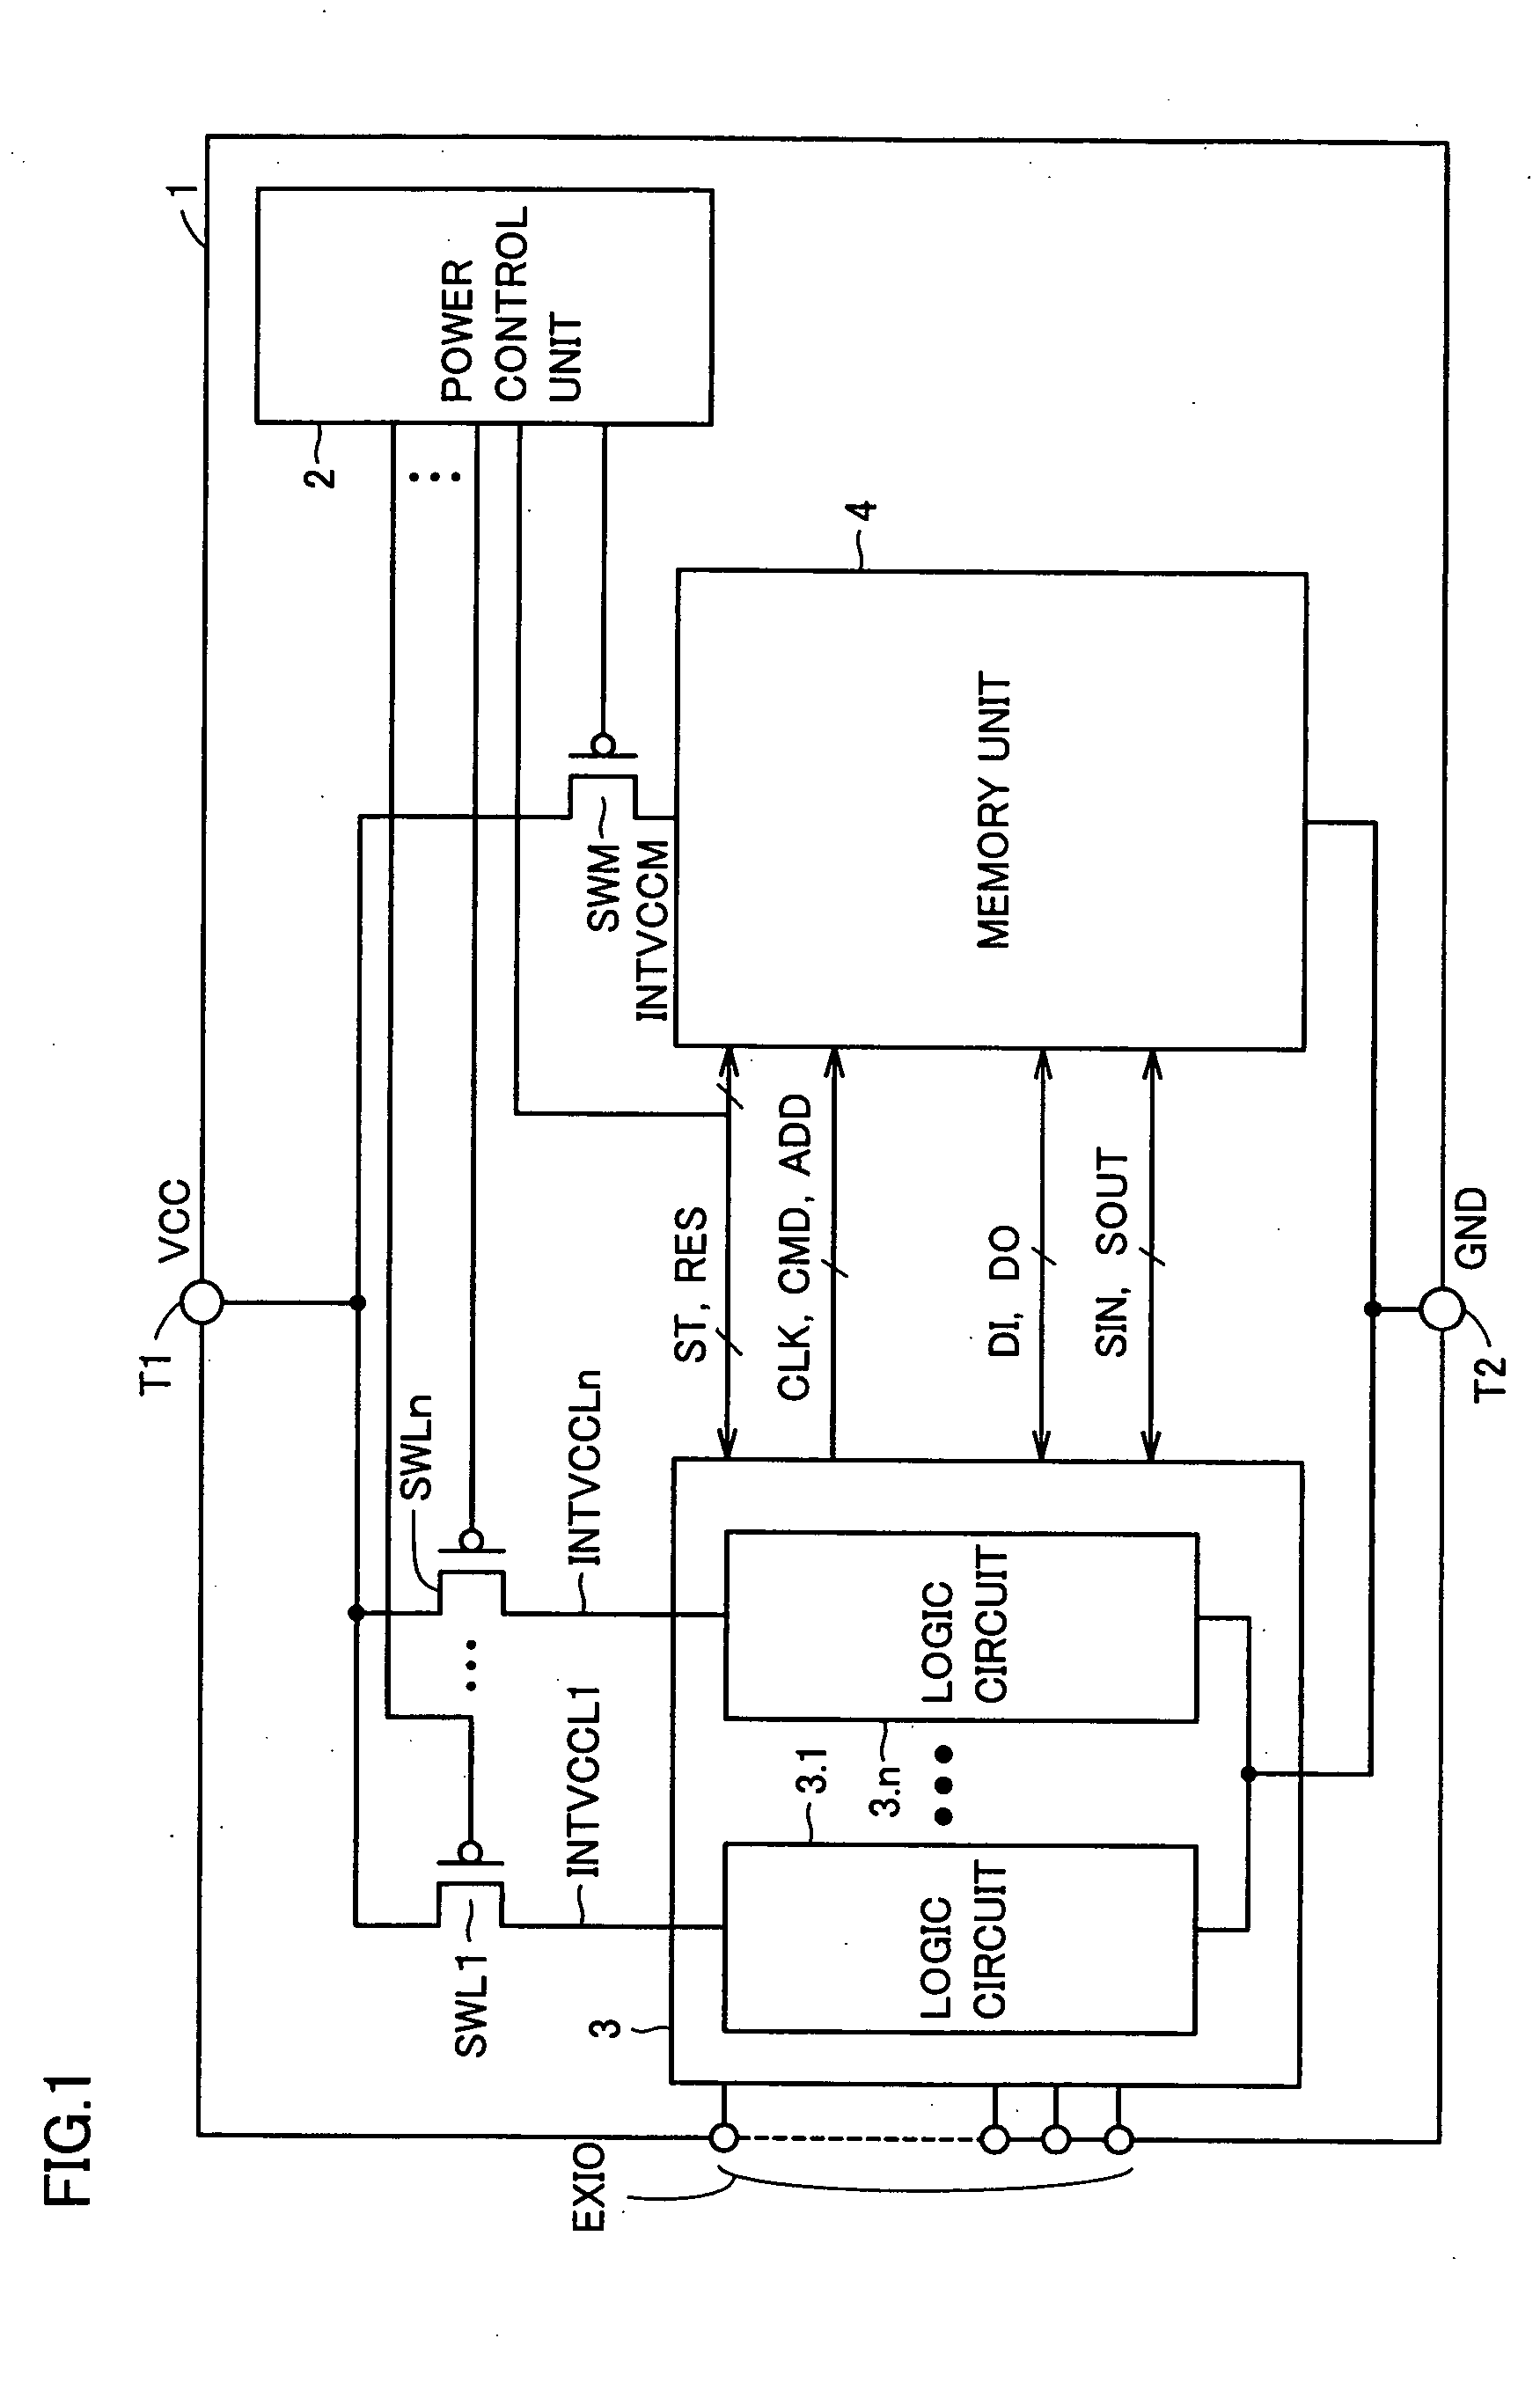 Semiconductor device saving data in non-volatile manner during standby